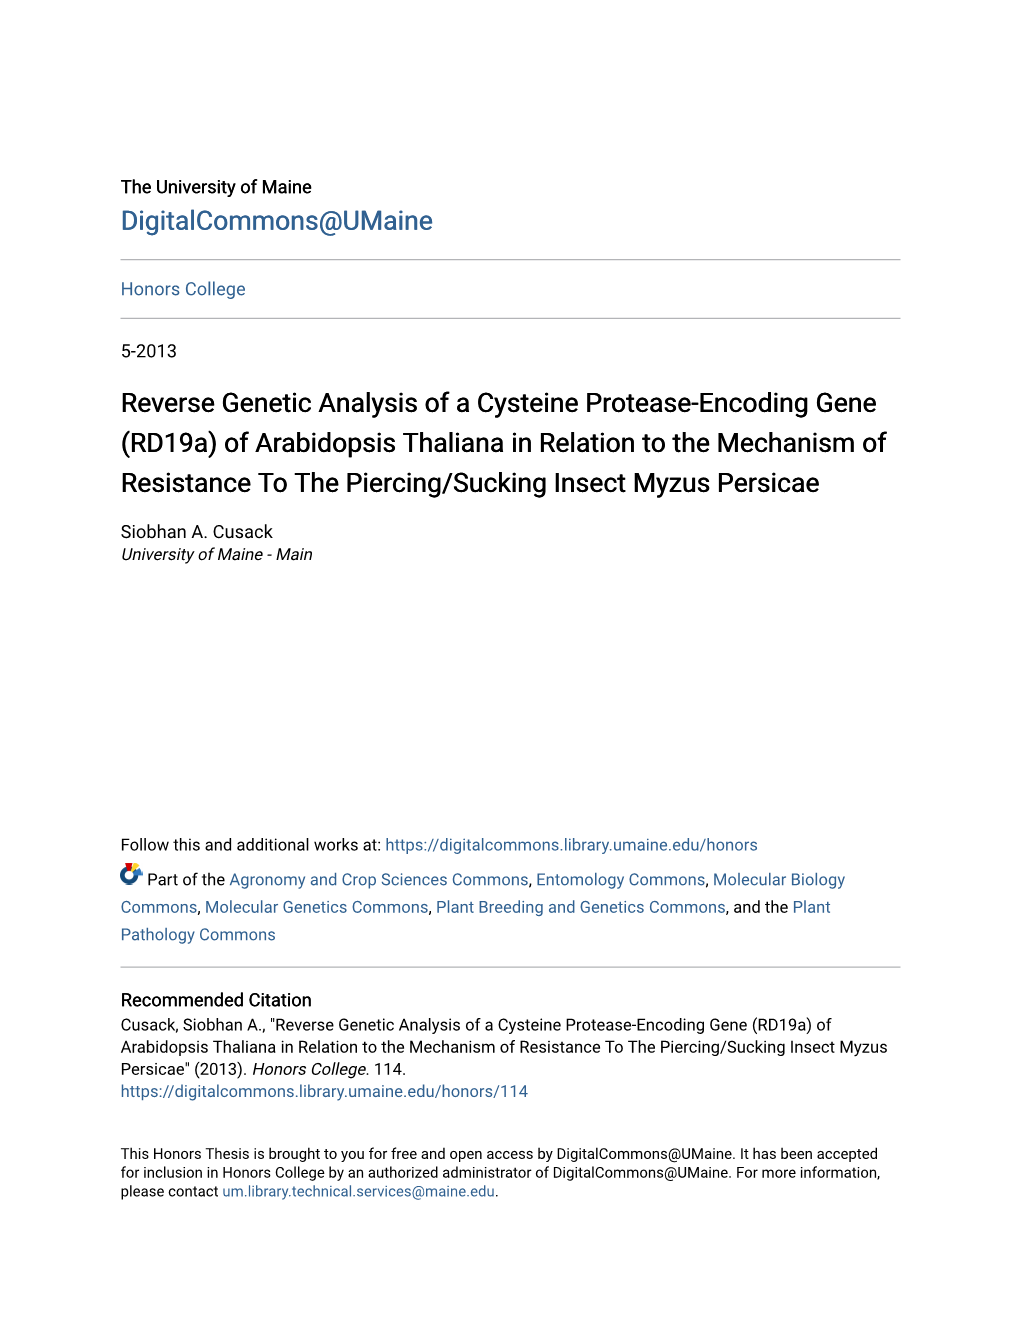 Reverse Genetic Analysis of a Cysteine Protease-Encoding Gene